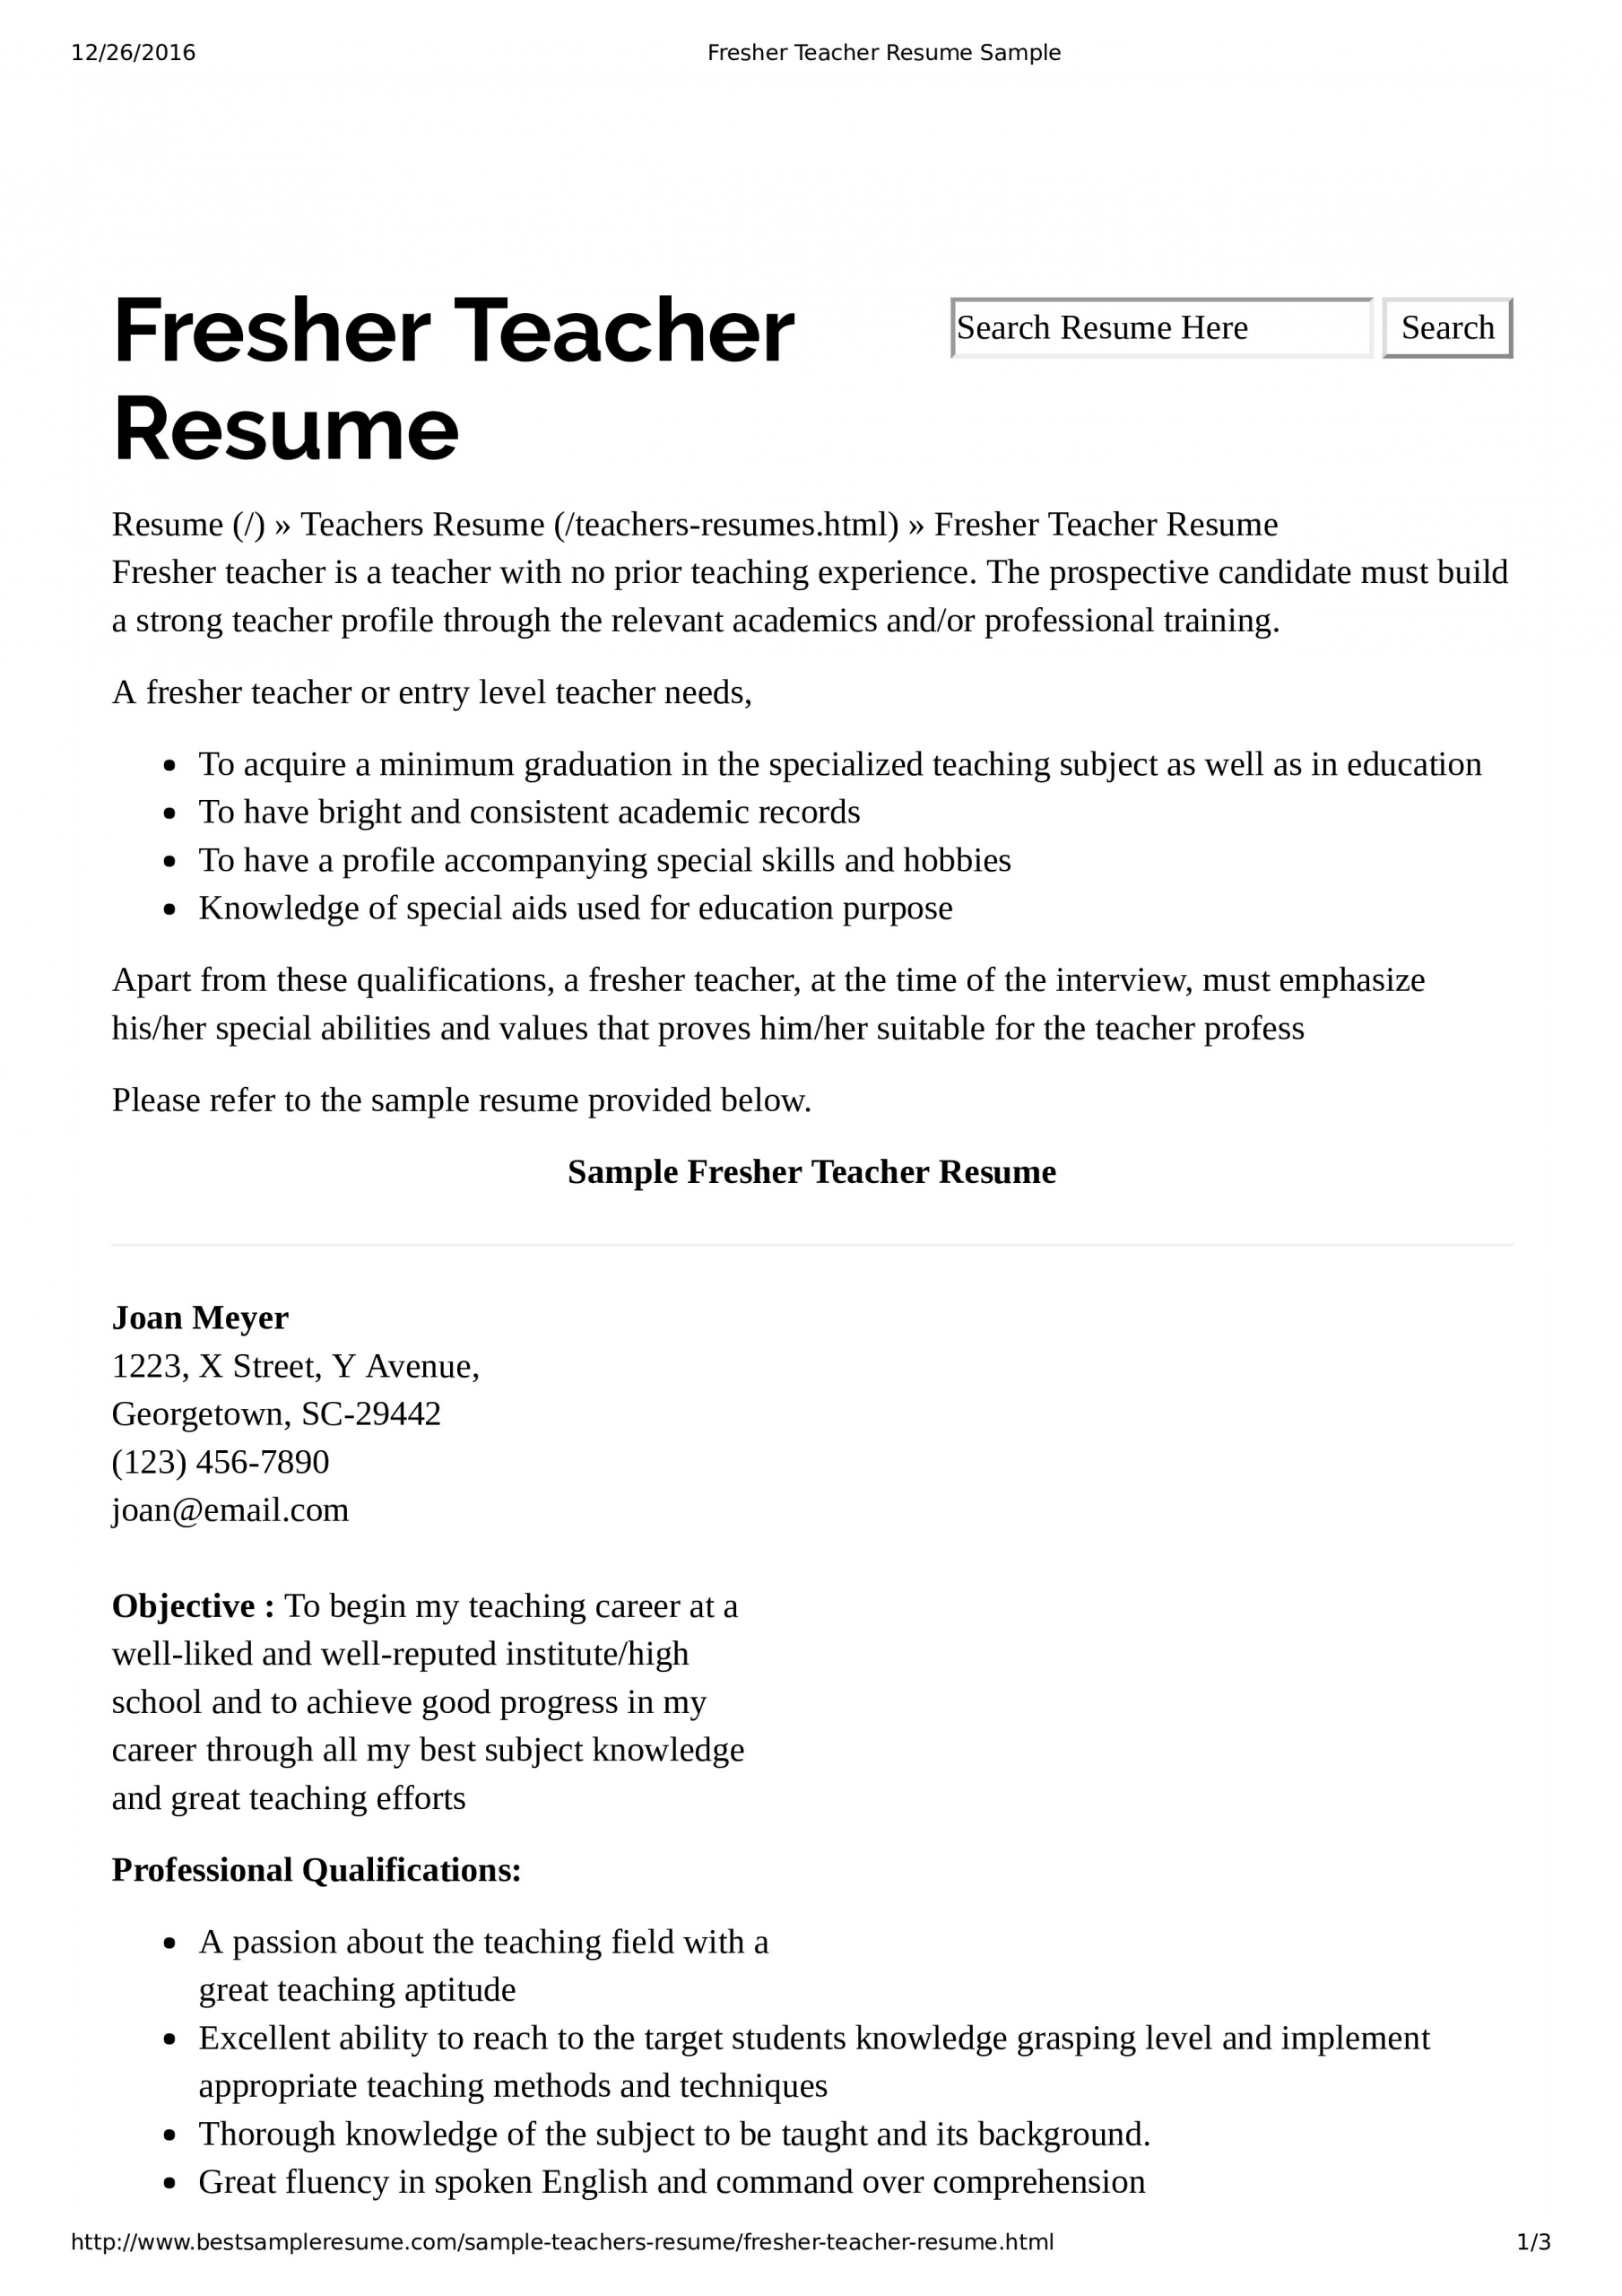 Sample Resume for Elementary Teachers without Experience Preschool Teacher Resume without Experience